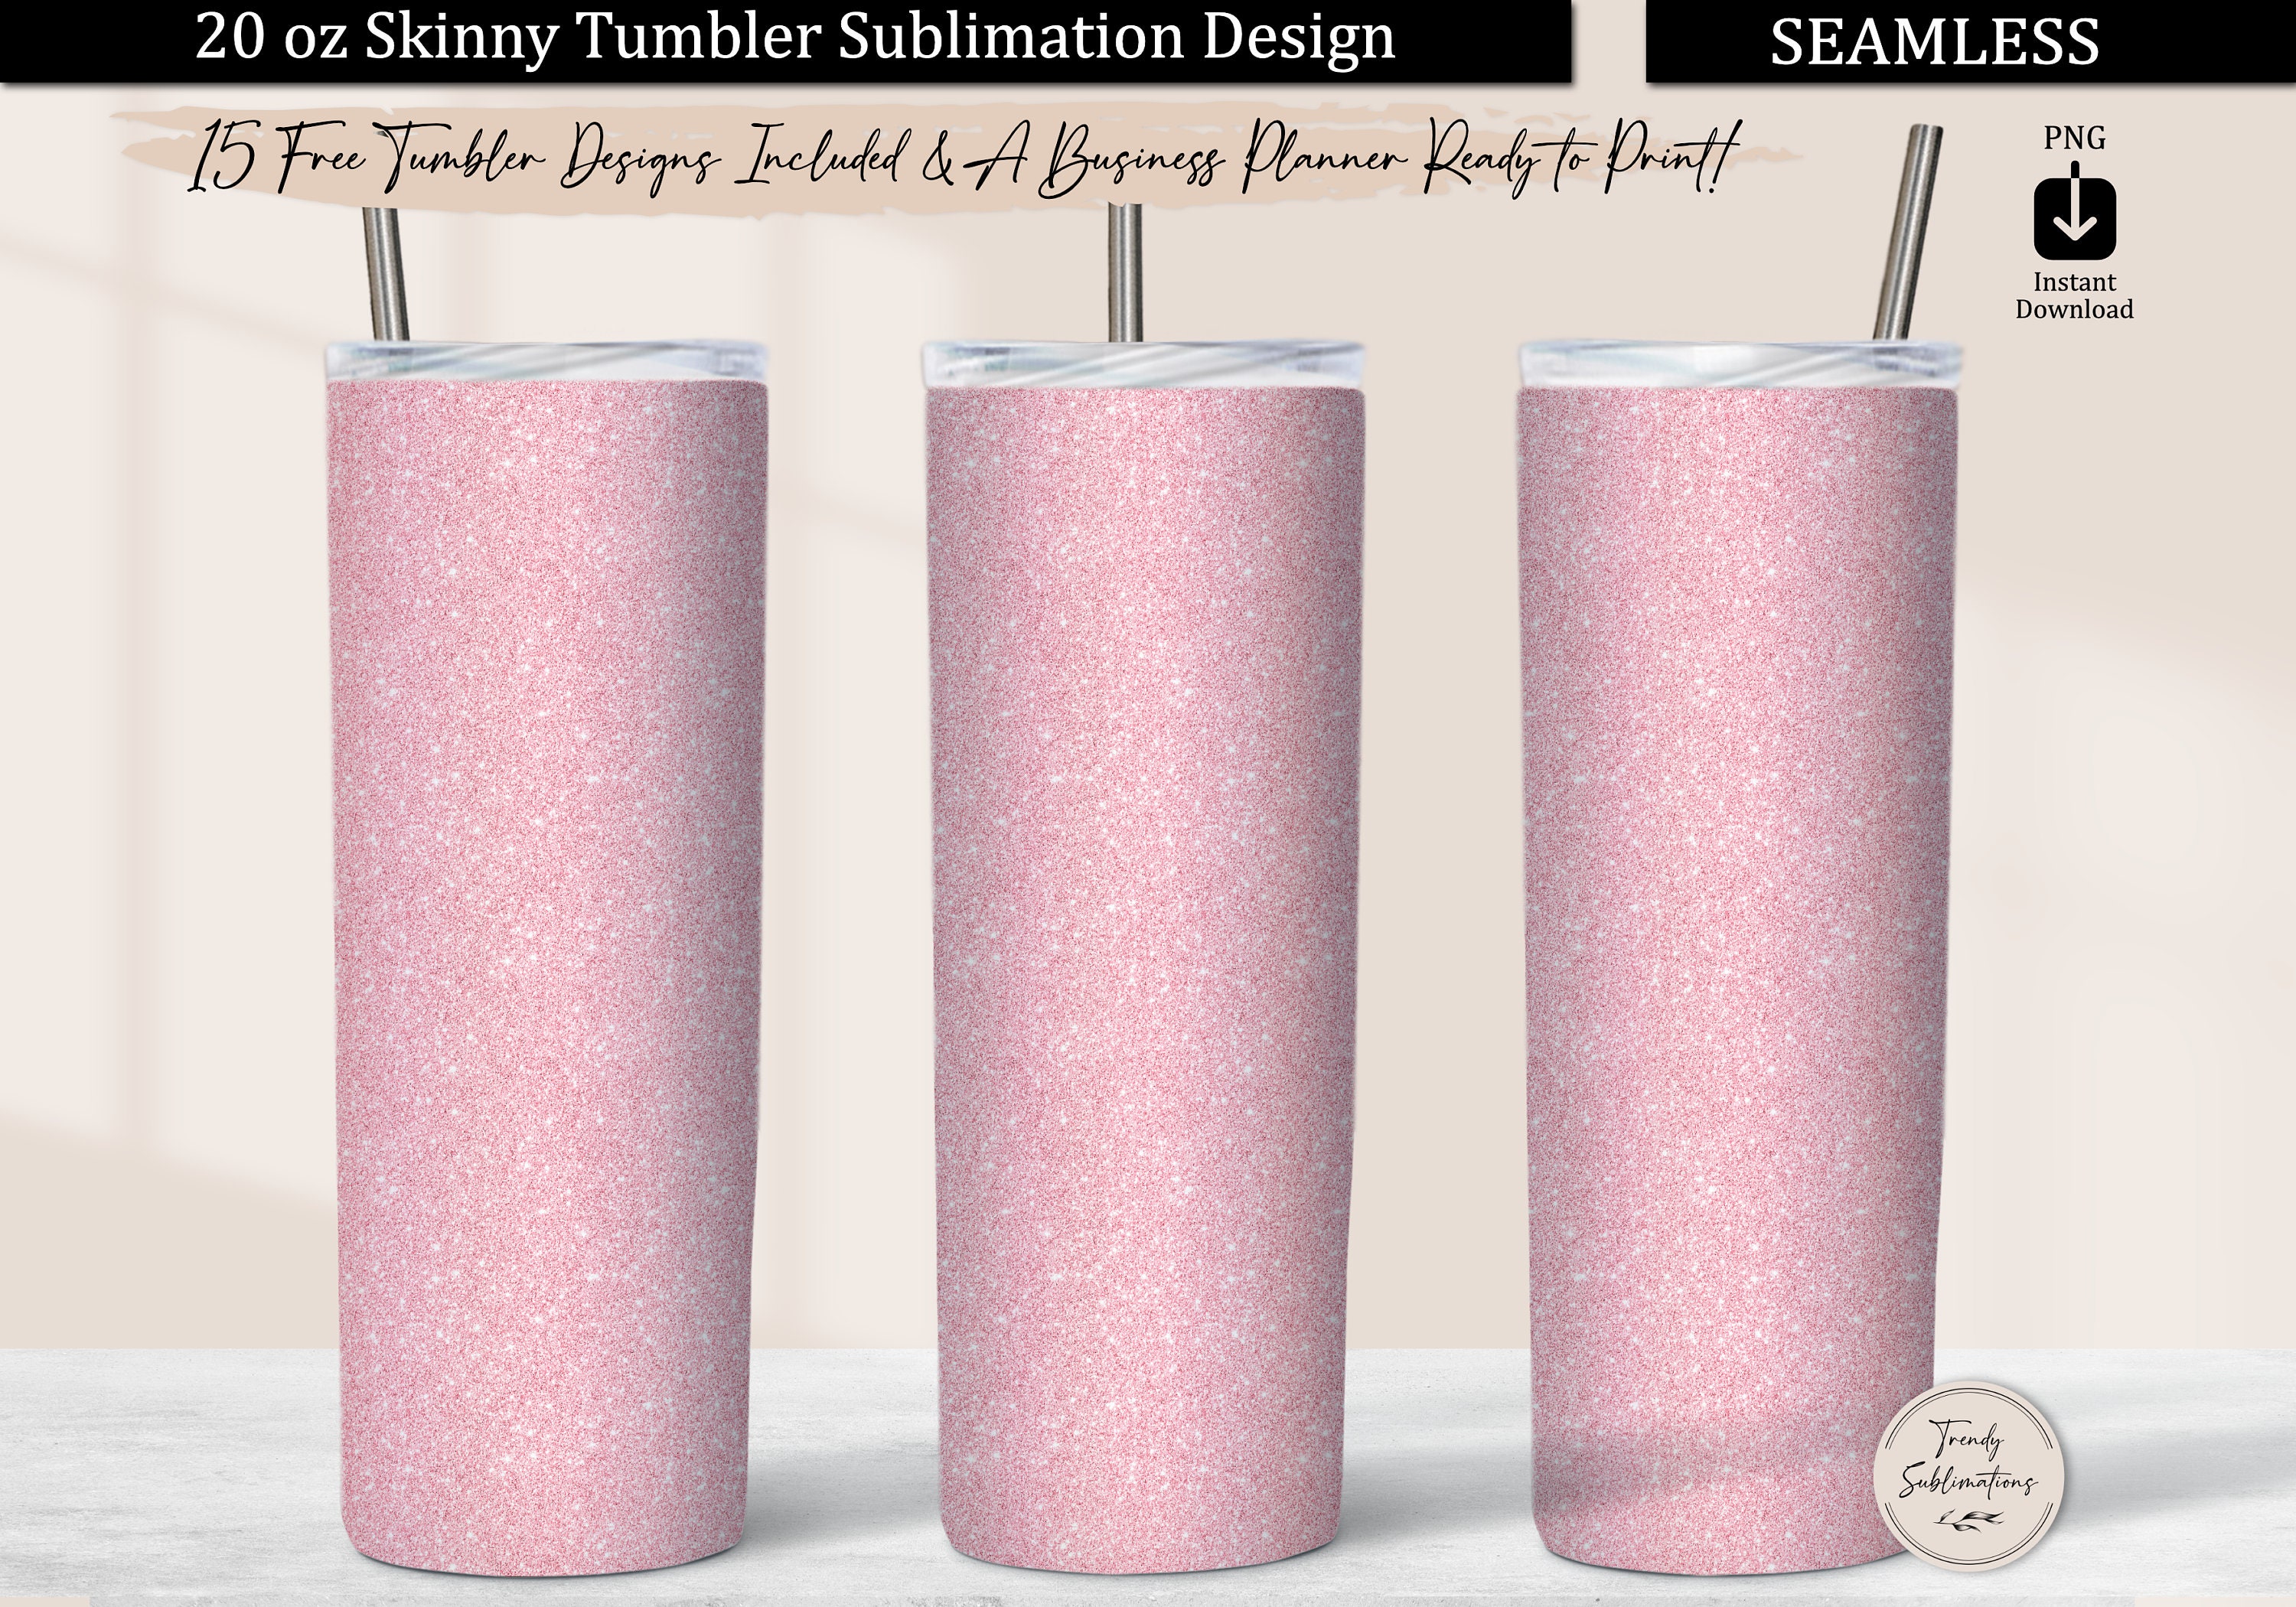 Shimmer Stainless Steel 20 Oz Straight Sublimation Tumbler Sublimation  Kings of Florida Pink Teal White Purple Black Party Gift 